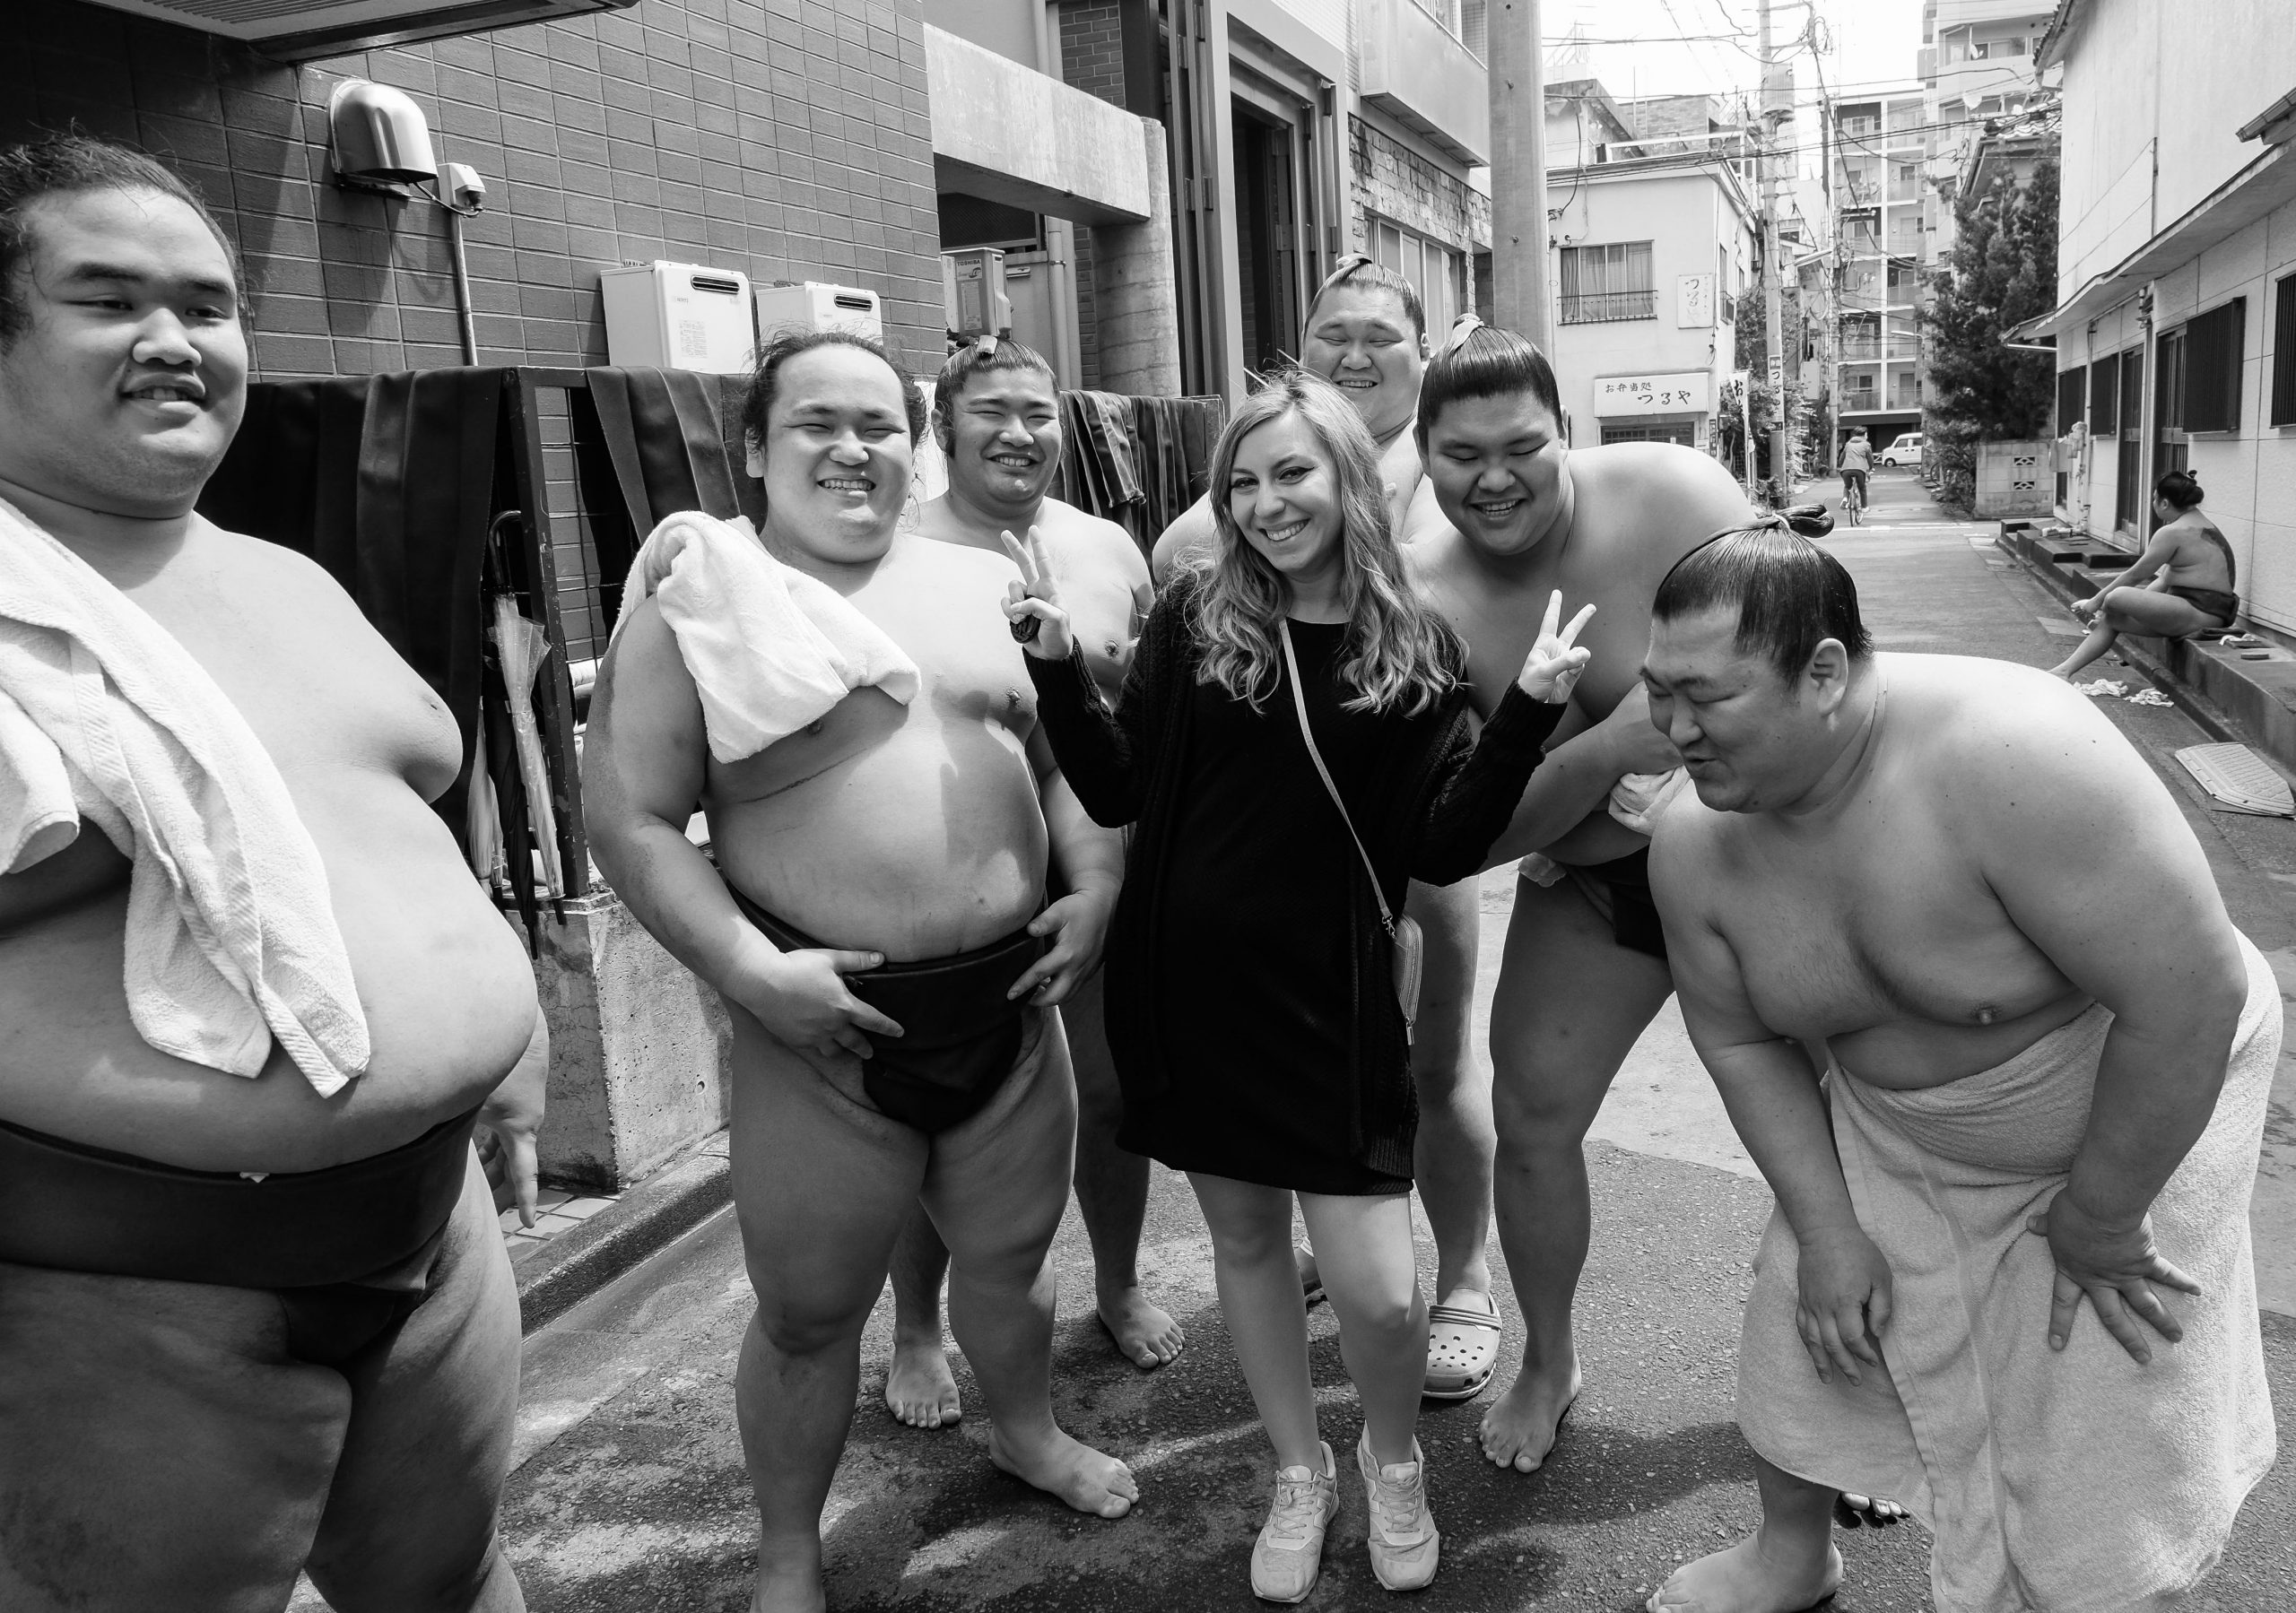 Cory seeing the Sumo Players Morning Practice - one of the unique things to do in Tokyo